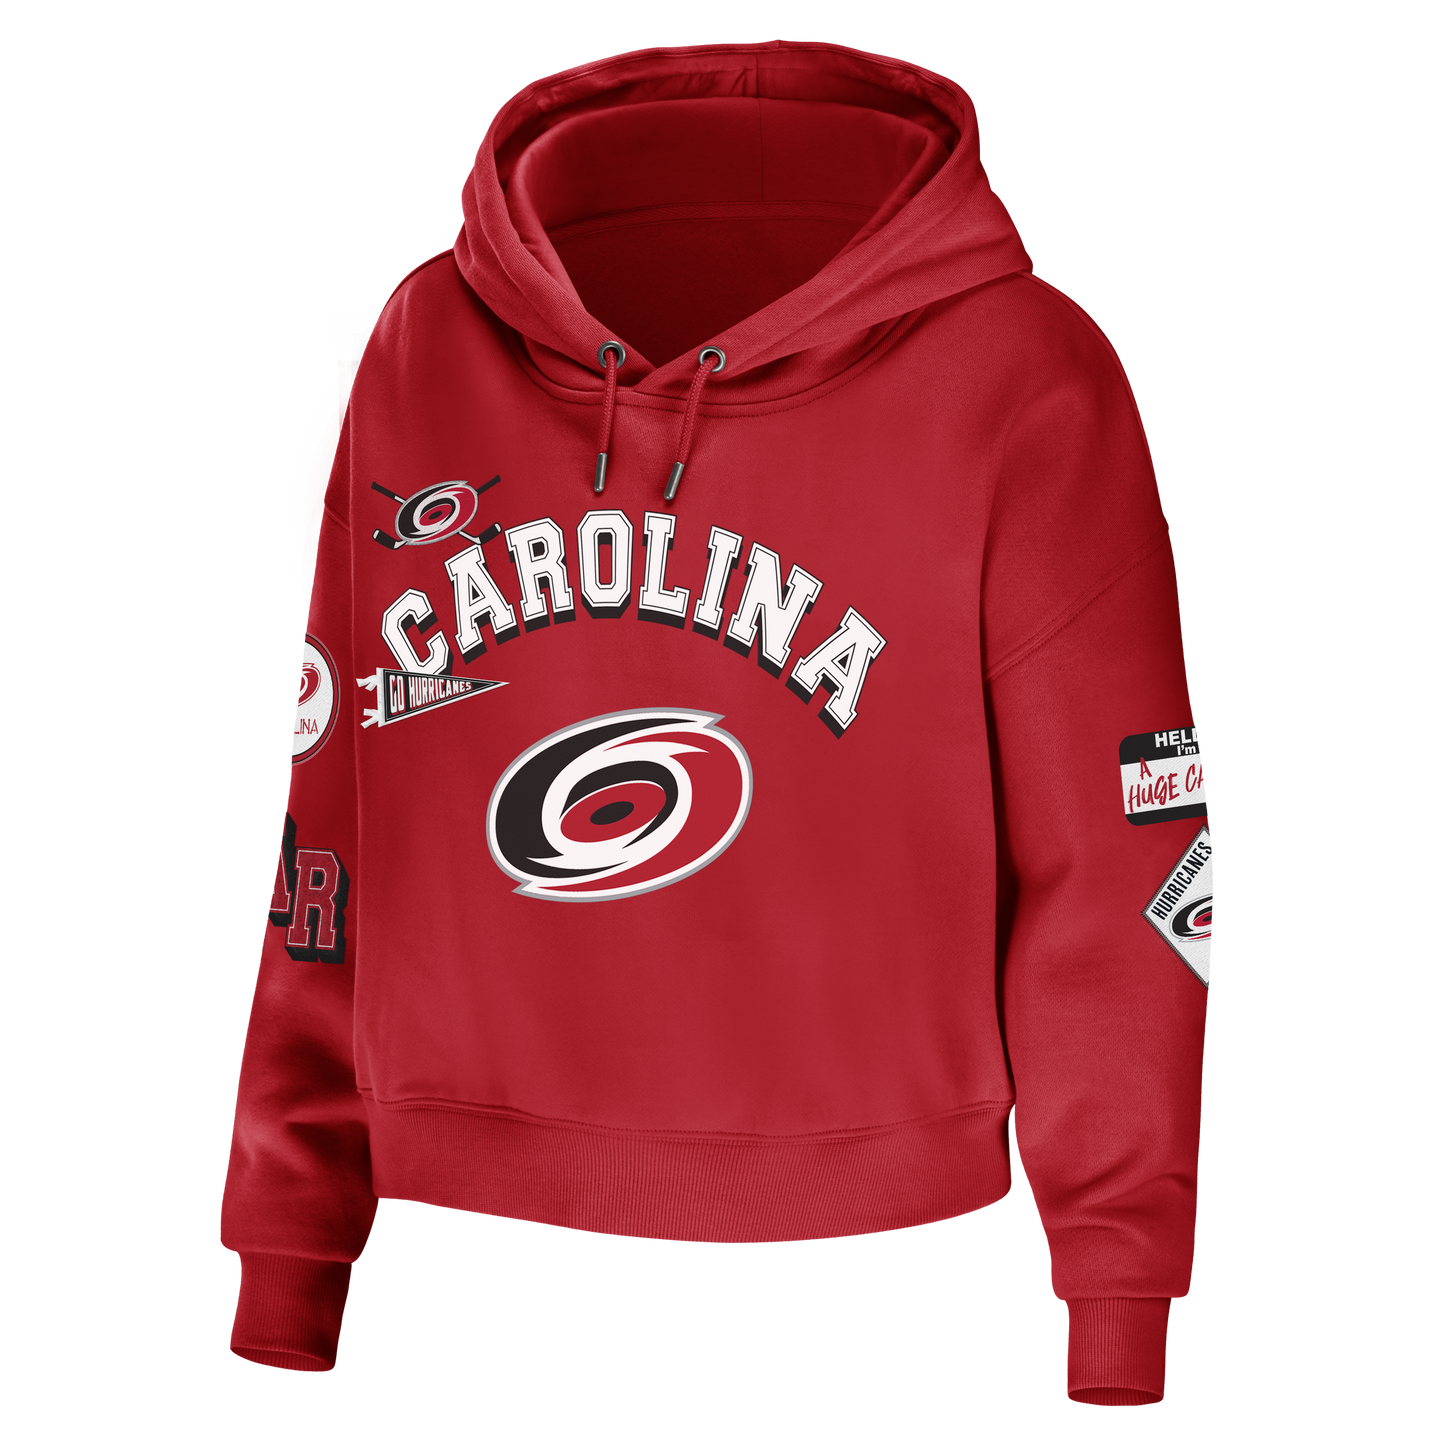 Front View: Red hoodie "Carolina" across chest with hurricanes logo and patches along sleeves